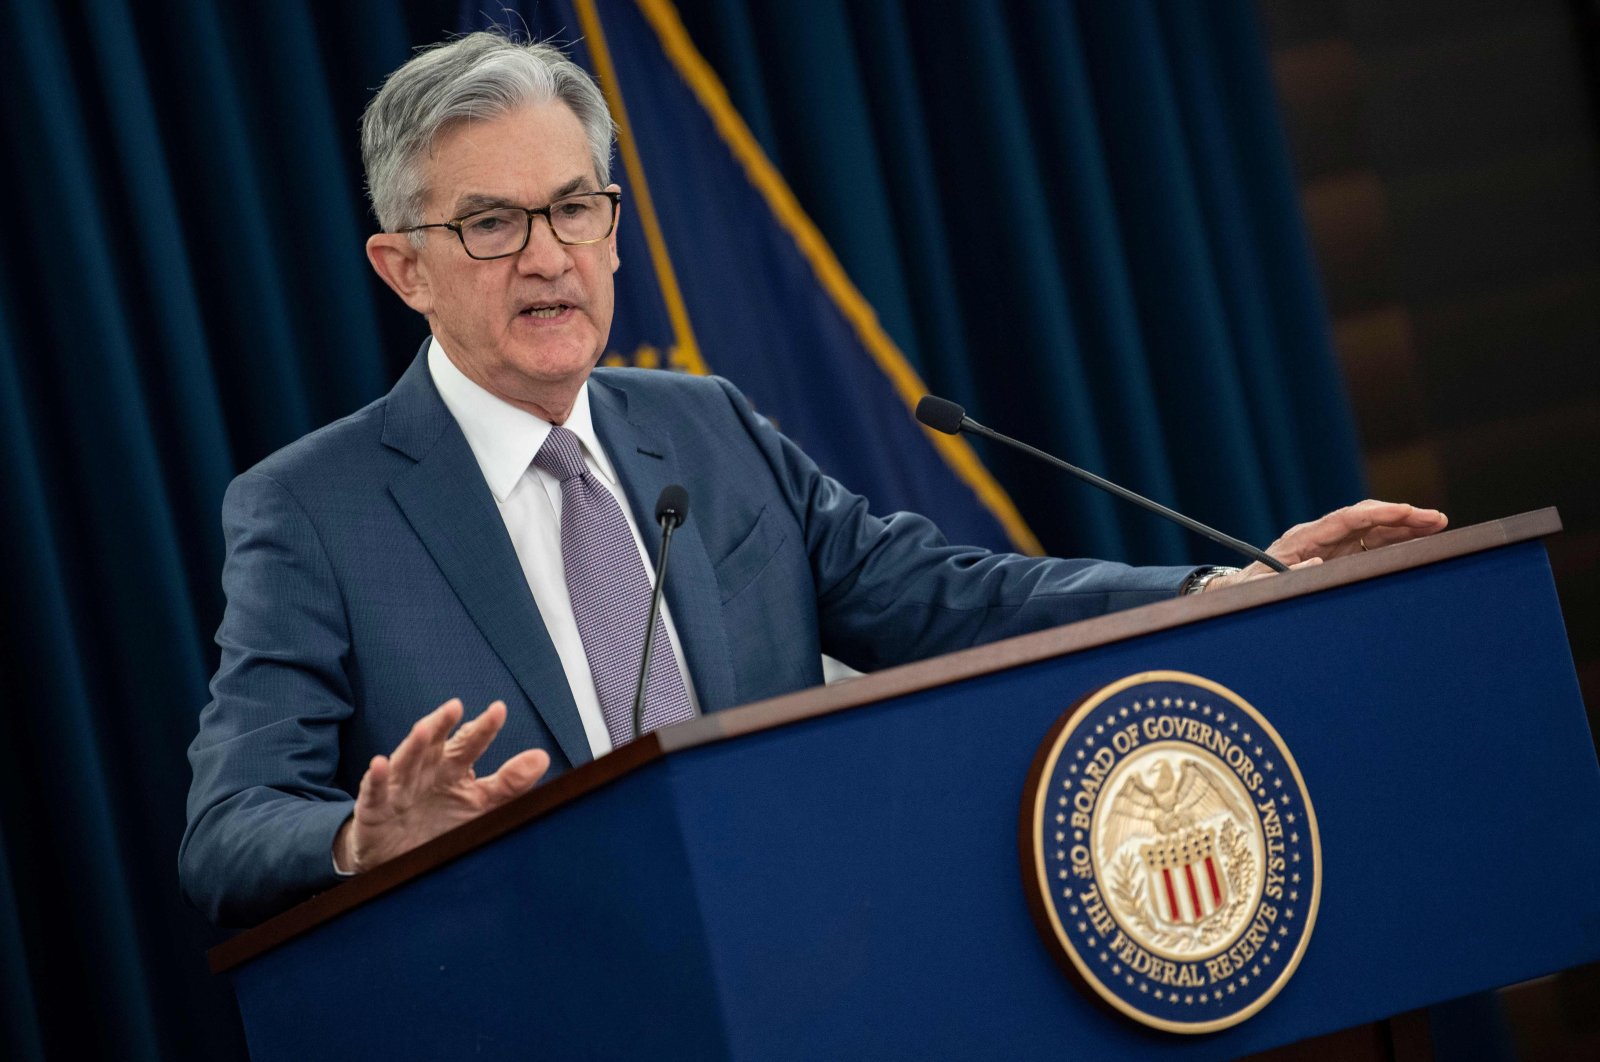 U.S. Federal Reserve Chairman Jerome Powell speaks at a press briefing in Washington, D.C., March 3, 2020. (AFP Photo)